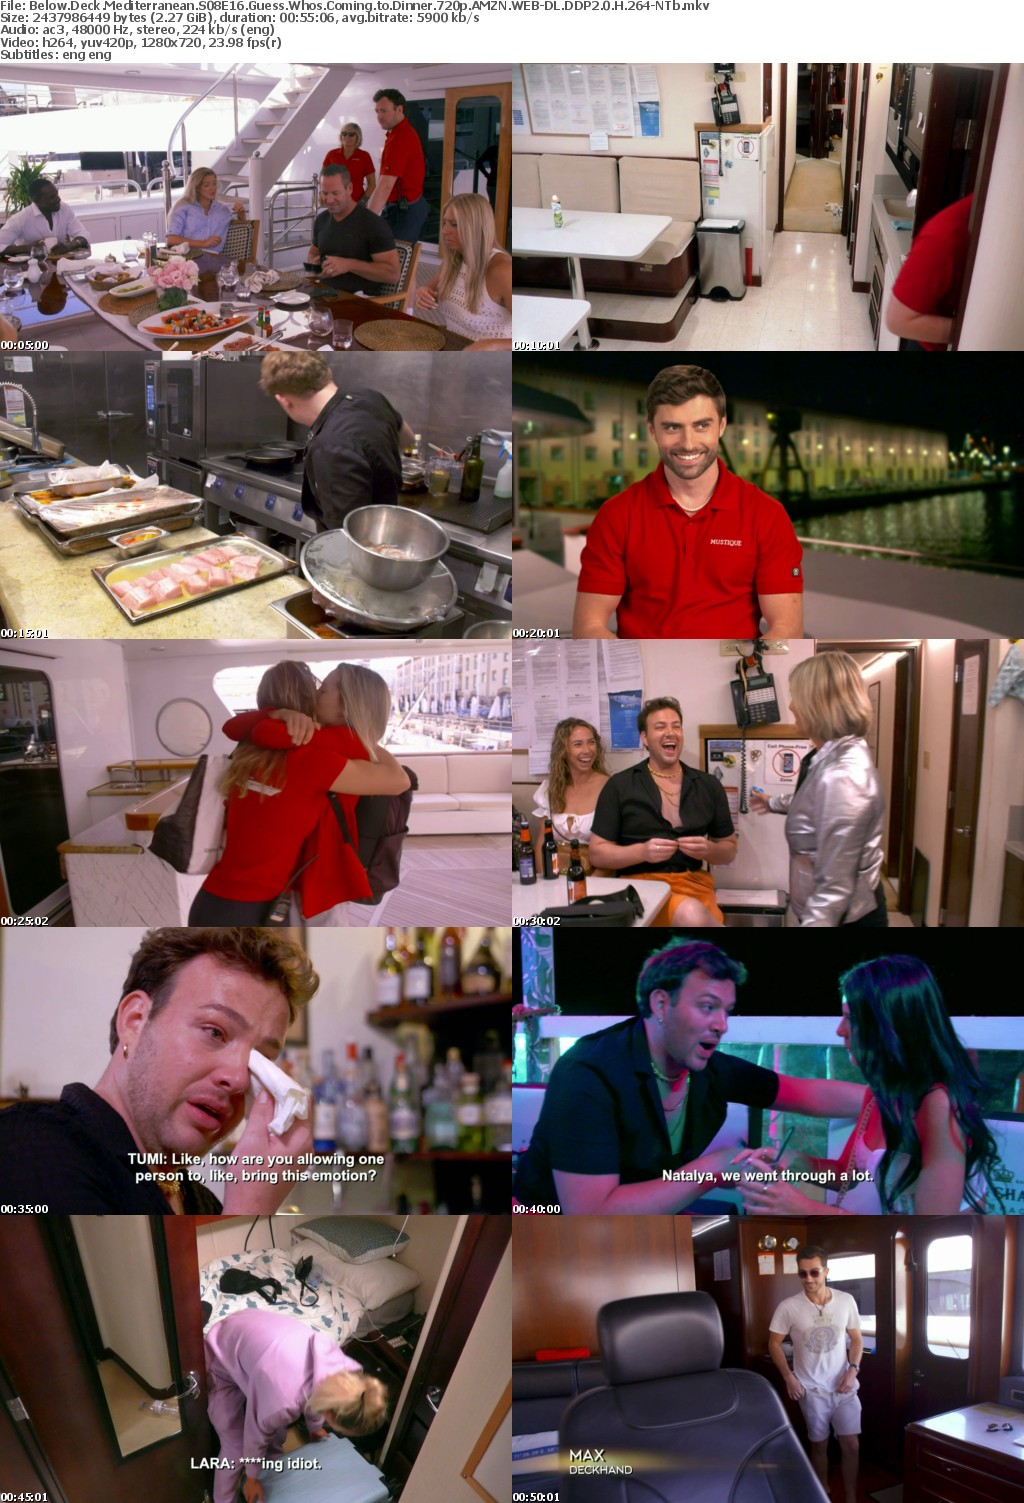 Below Deck Mediterranean S08E16 Guess Whos Coming to Dinner 720p AMZN WEB-DL DDP2 0 H 264-NTb